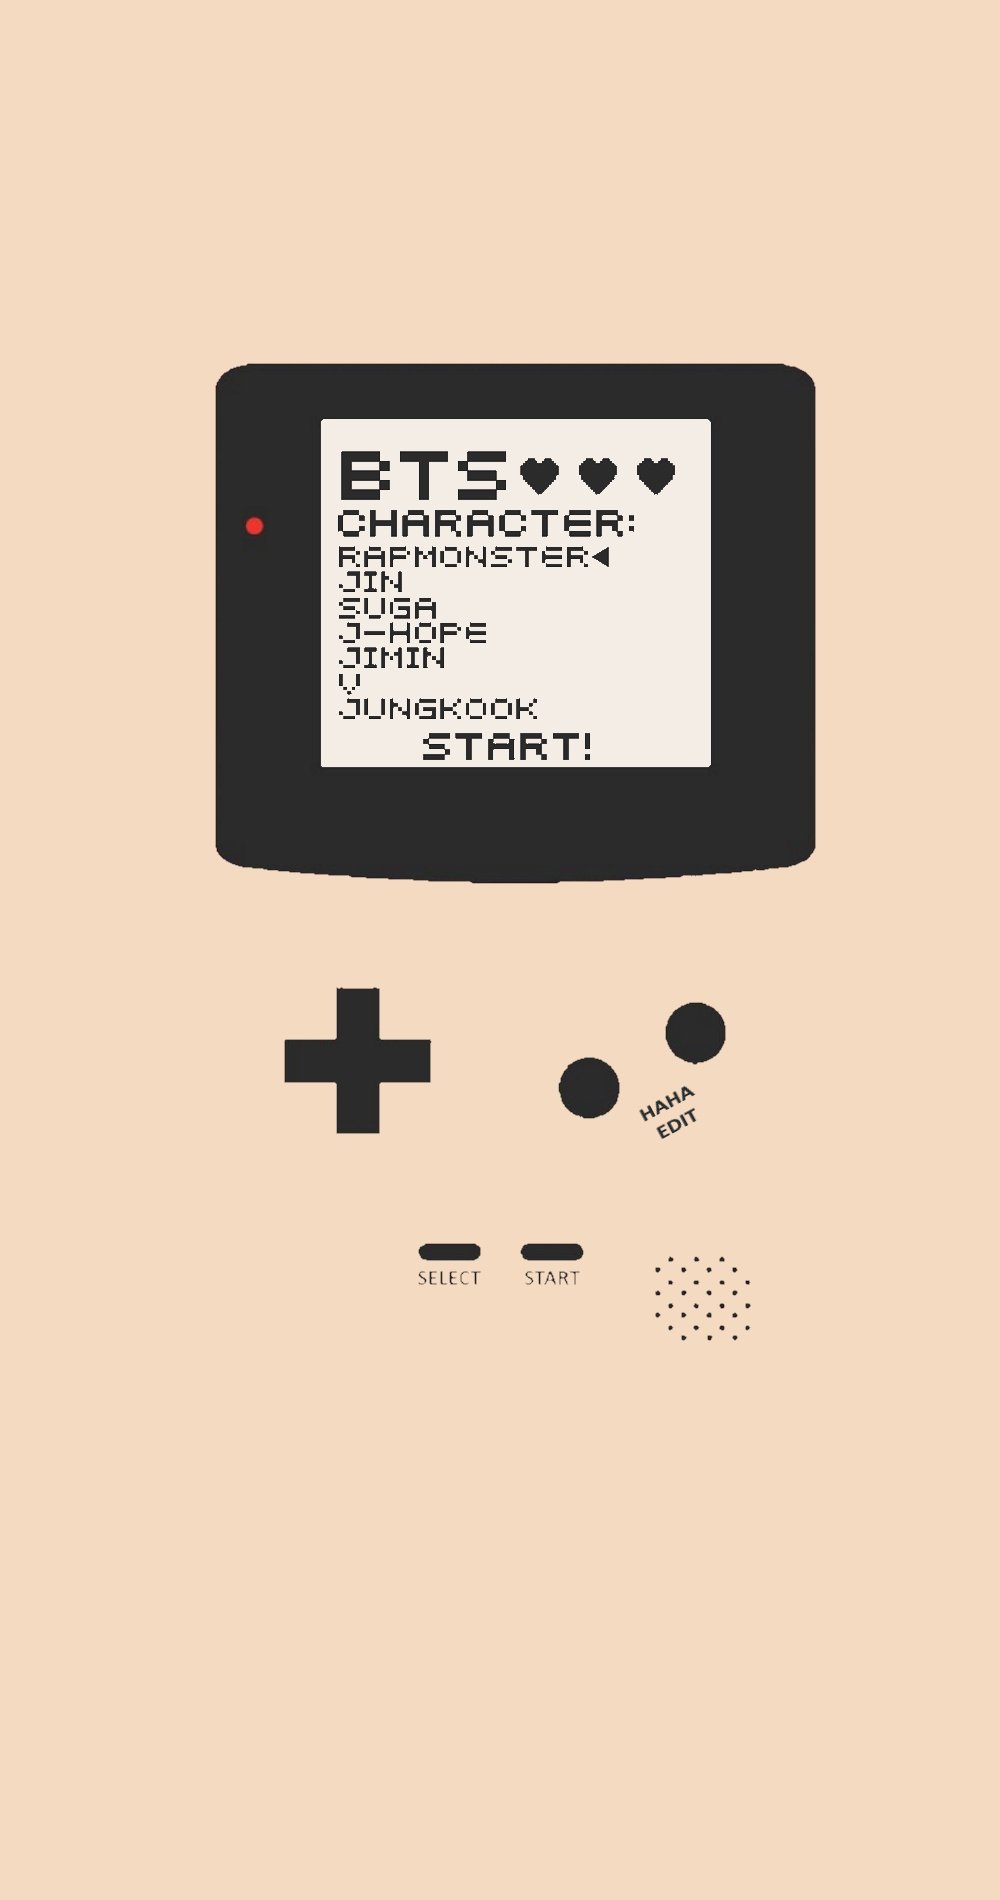 BTS GAMEBOY WALLPAPERS (2) Please keep the image for your personal use only. Do not edit. cr. hahaedit & haha_market